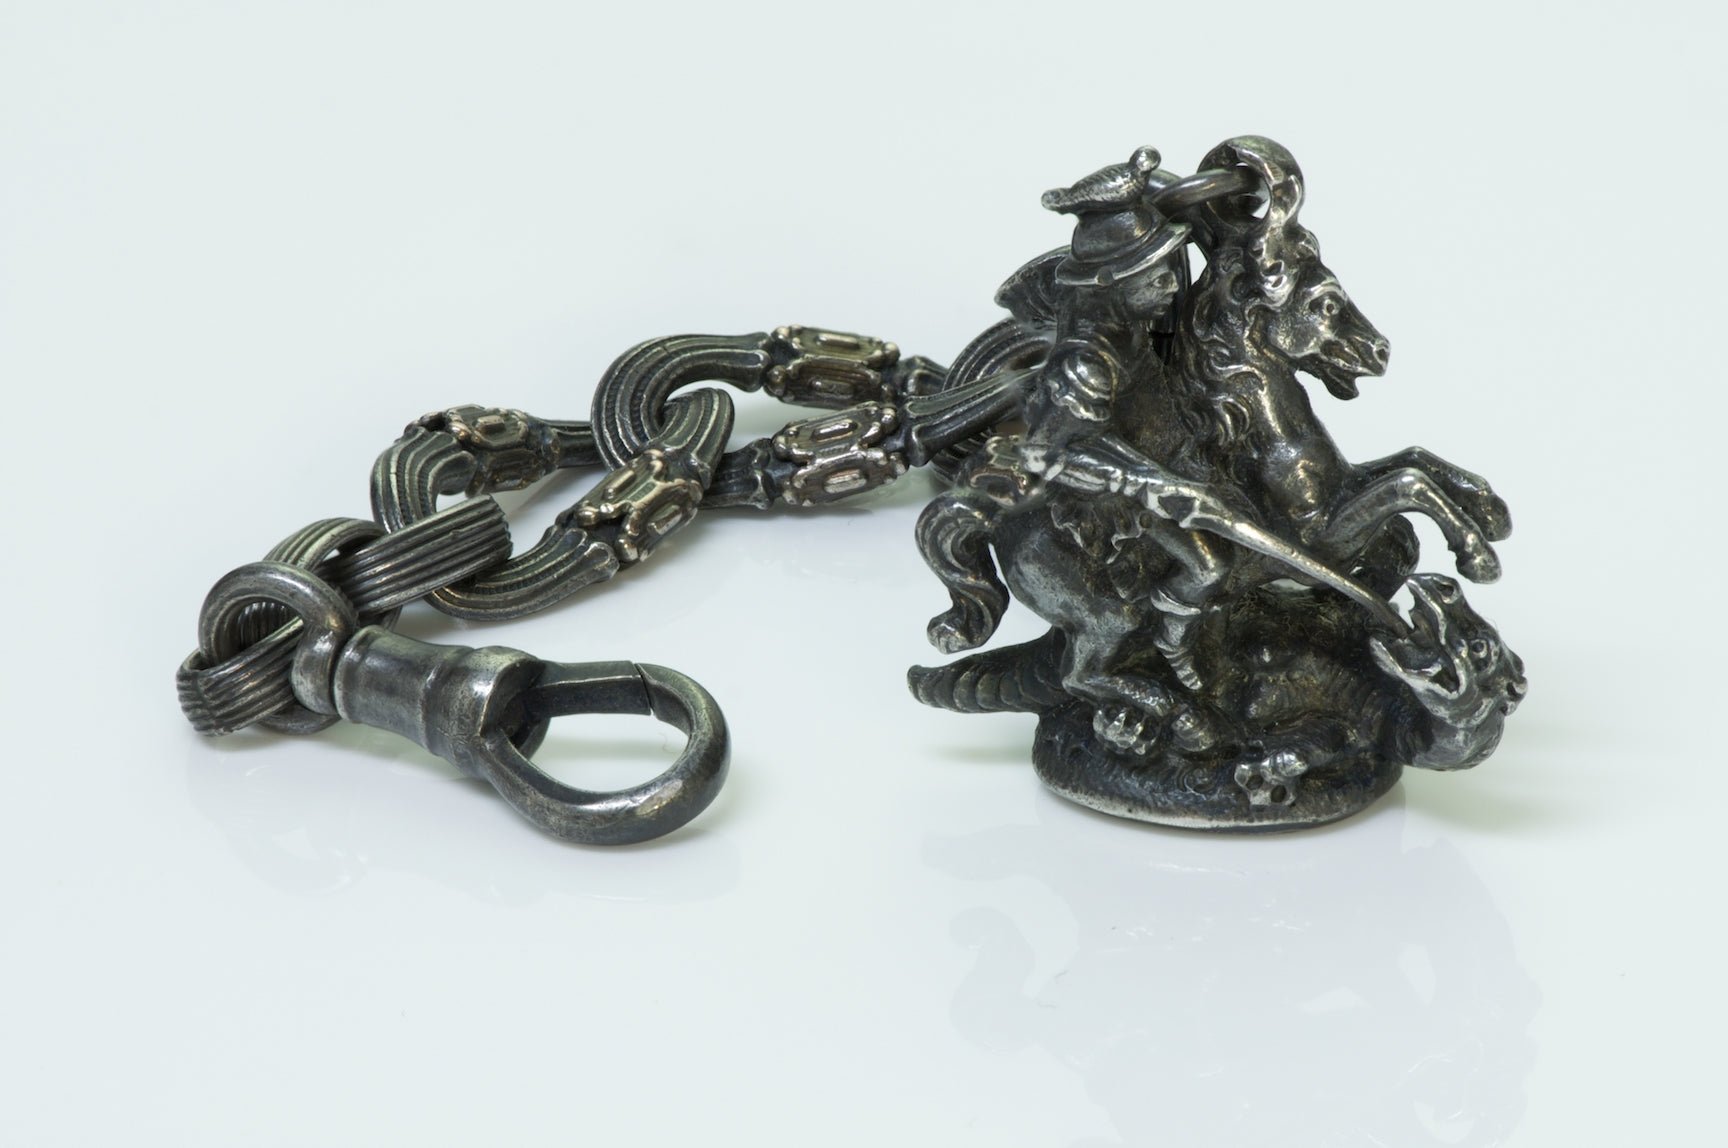 Antique Warrior Dragon Silver & Gold Watch Chain Fob - DSF Antique Jewelry